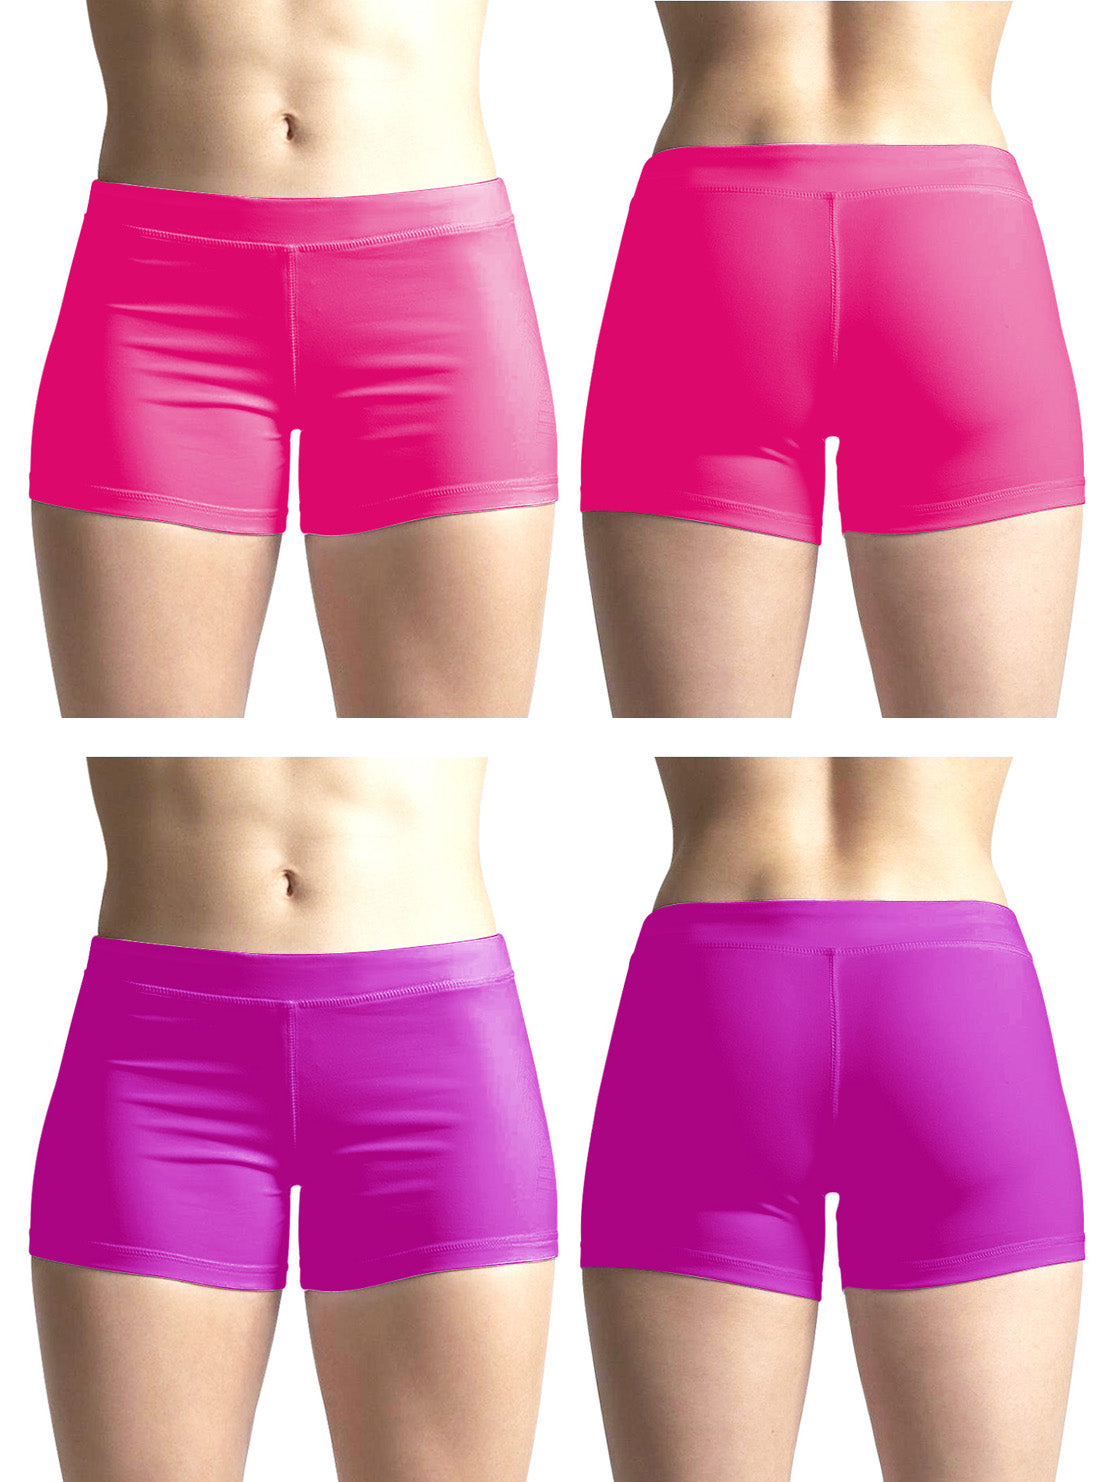 Women’s Compression Shorts for Yoga, Swimming, Beach, Fitness, and Casual Wear